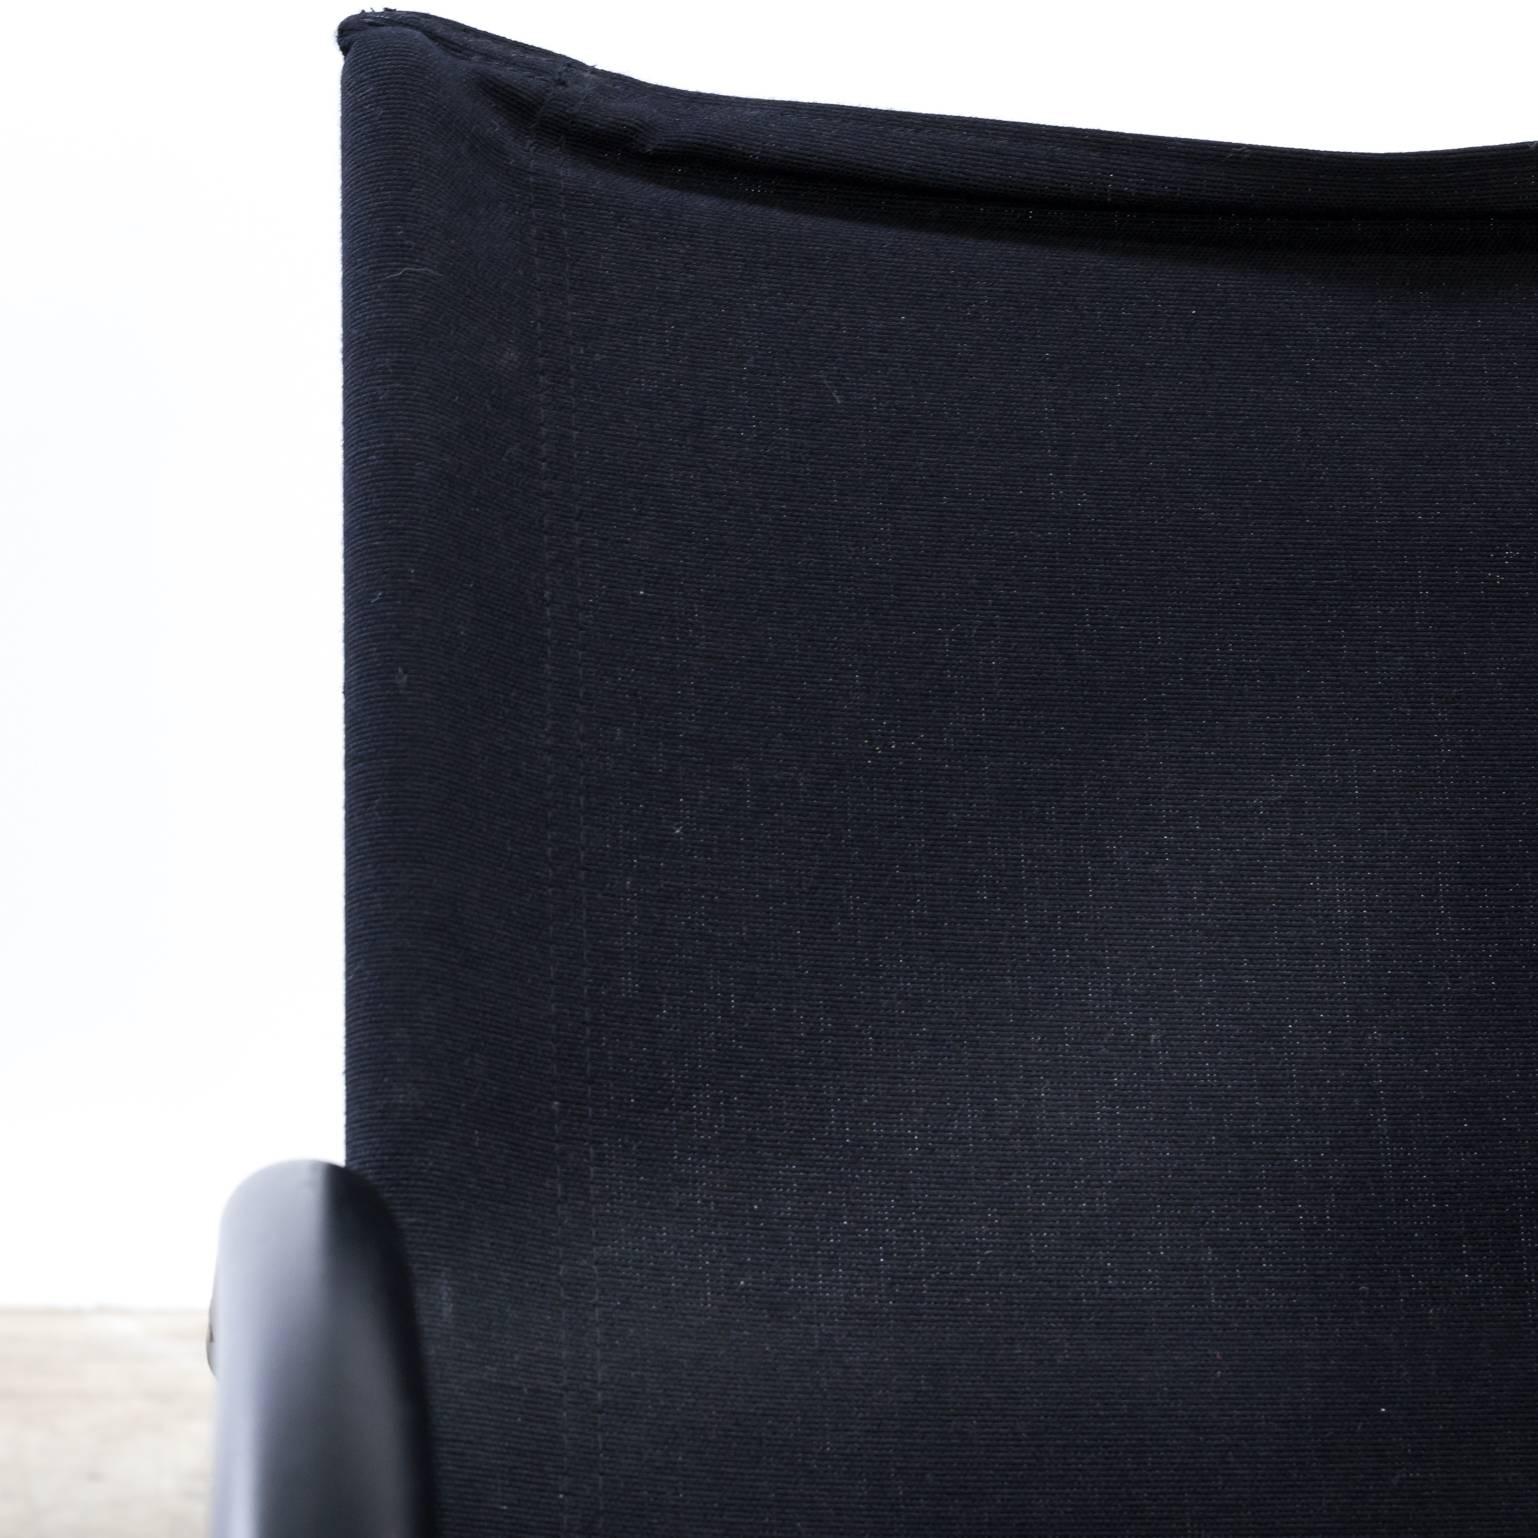 Design Swivel Chair Black Canvas Fabric Attributed to Mazairac & Boonzaaier For Sale 3